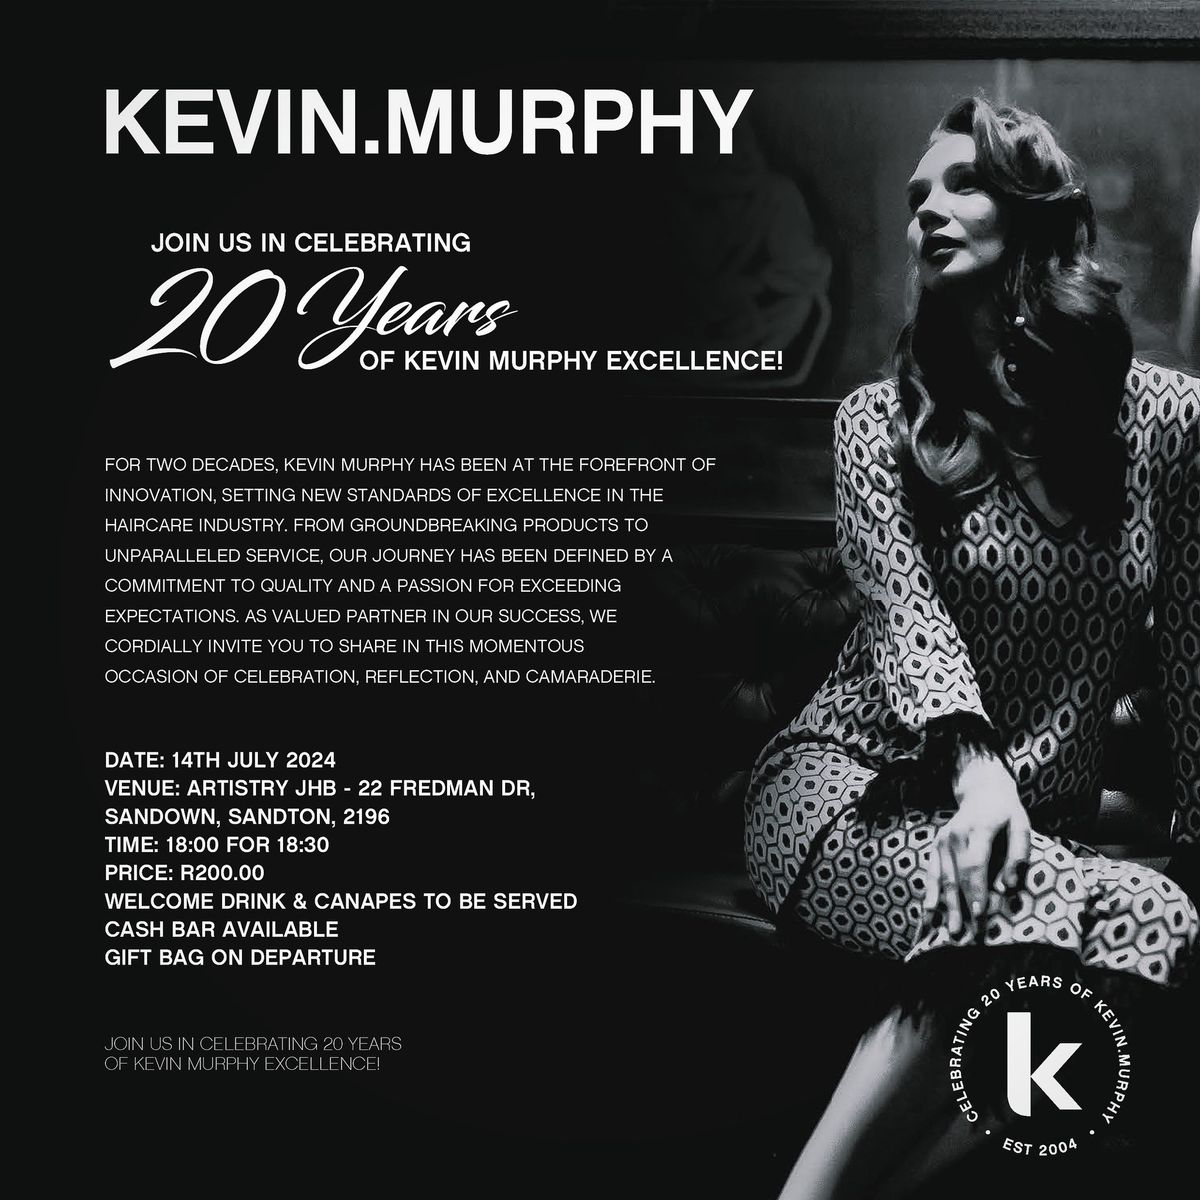 Celebrating 20 Years of Innovation with Kevin Murphy